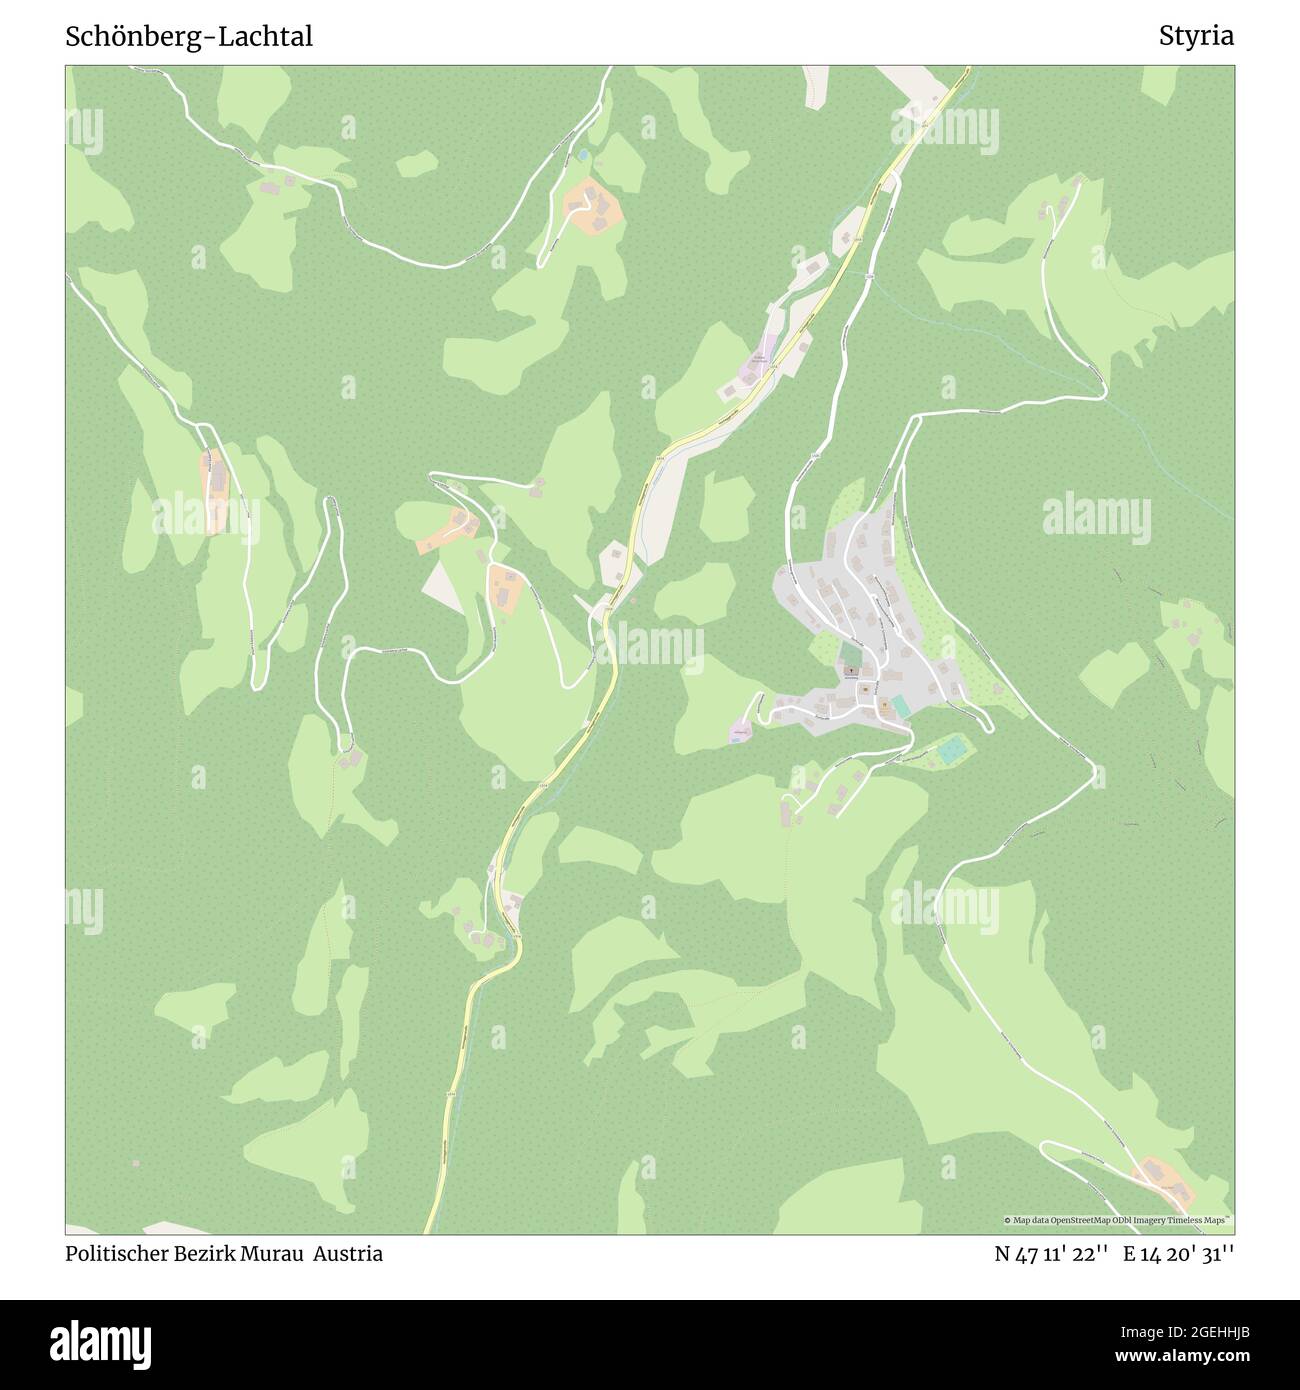 Schönberg-Lachtal, Politischer Bezirk Murau, Austria, Styria, N 47 11' 22'', E 14 20' 31'', map, Timeless Map published in 2021. Travelers, explorers and adventurers like Florence Nightingale, David Livingstone, Ernest Shackleton, Lewis and Clark and Sherlock Holmes relied on maps to plan travels to the world's most remote corners, Timeless Maps is mapping most locations on the globe, showing the achievement of great dreams Stock Photo